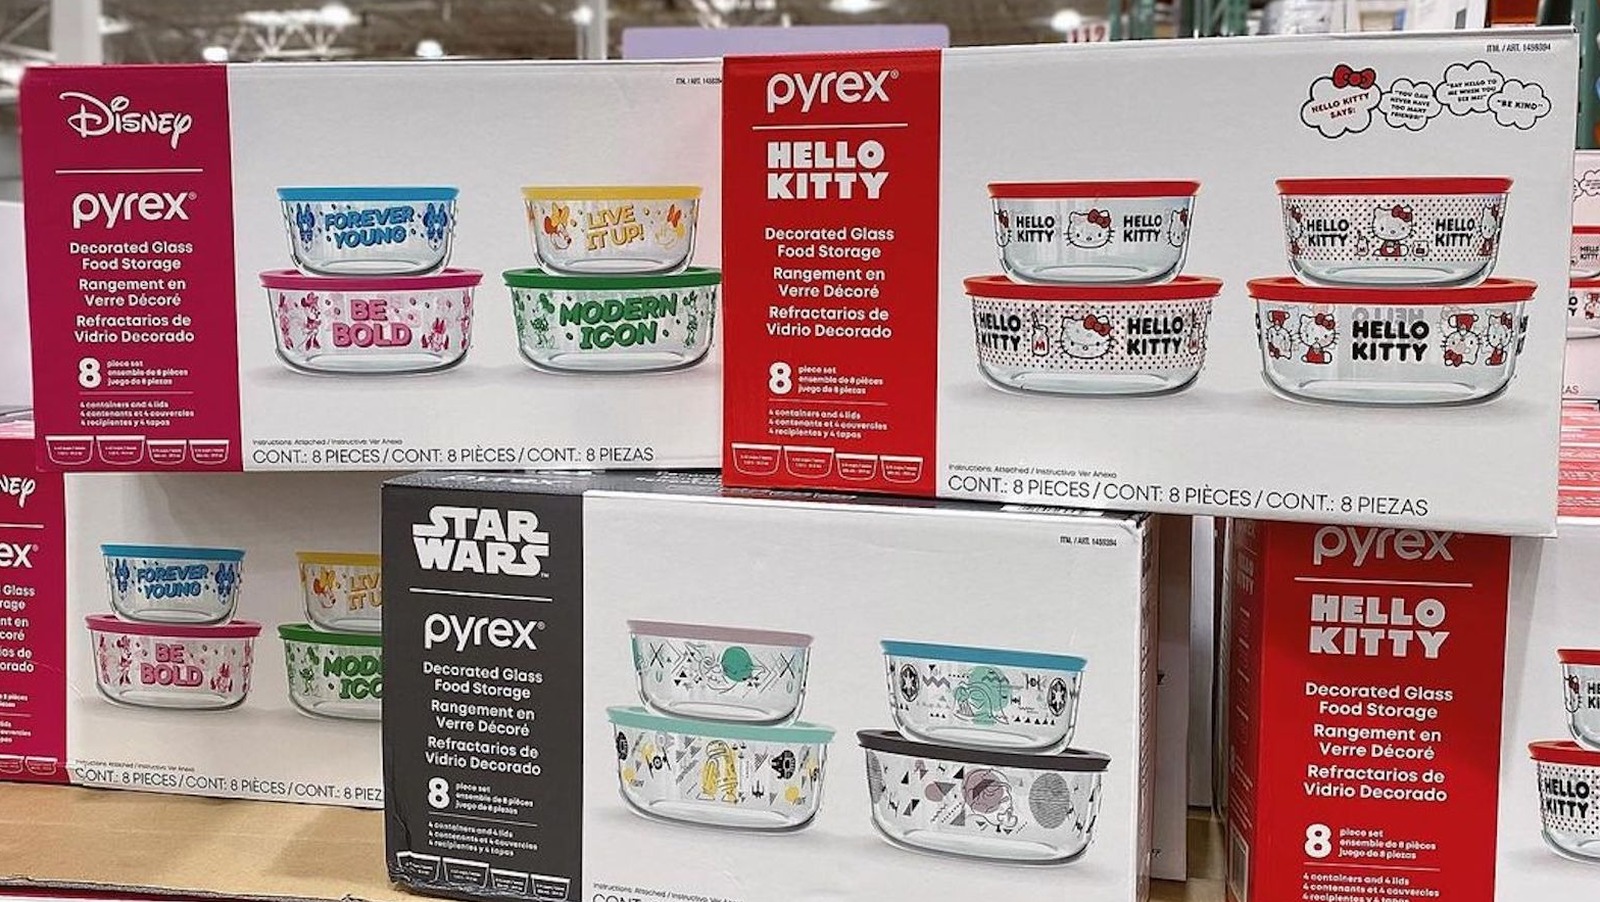 https://www.mashed.com/img/gallery/costcos-adorable-decorated-pyrex-sets-are-turning-heads/l-intro-1629920657.jpg